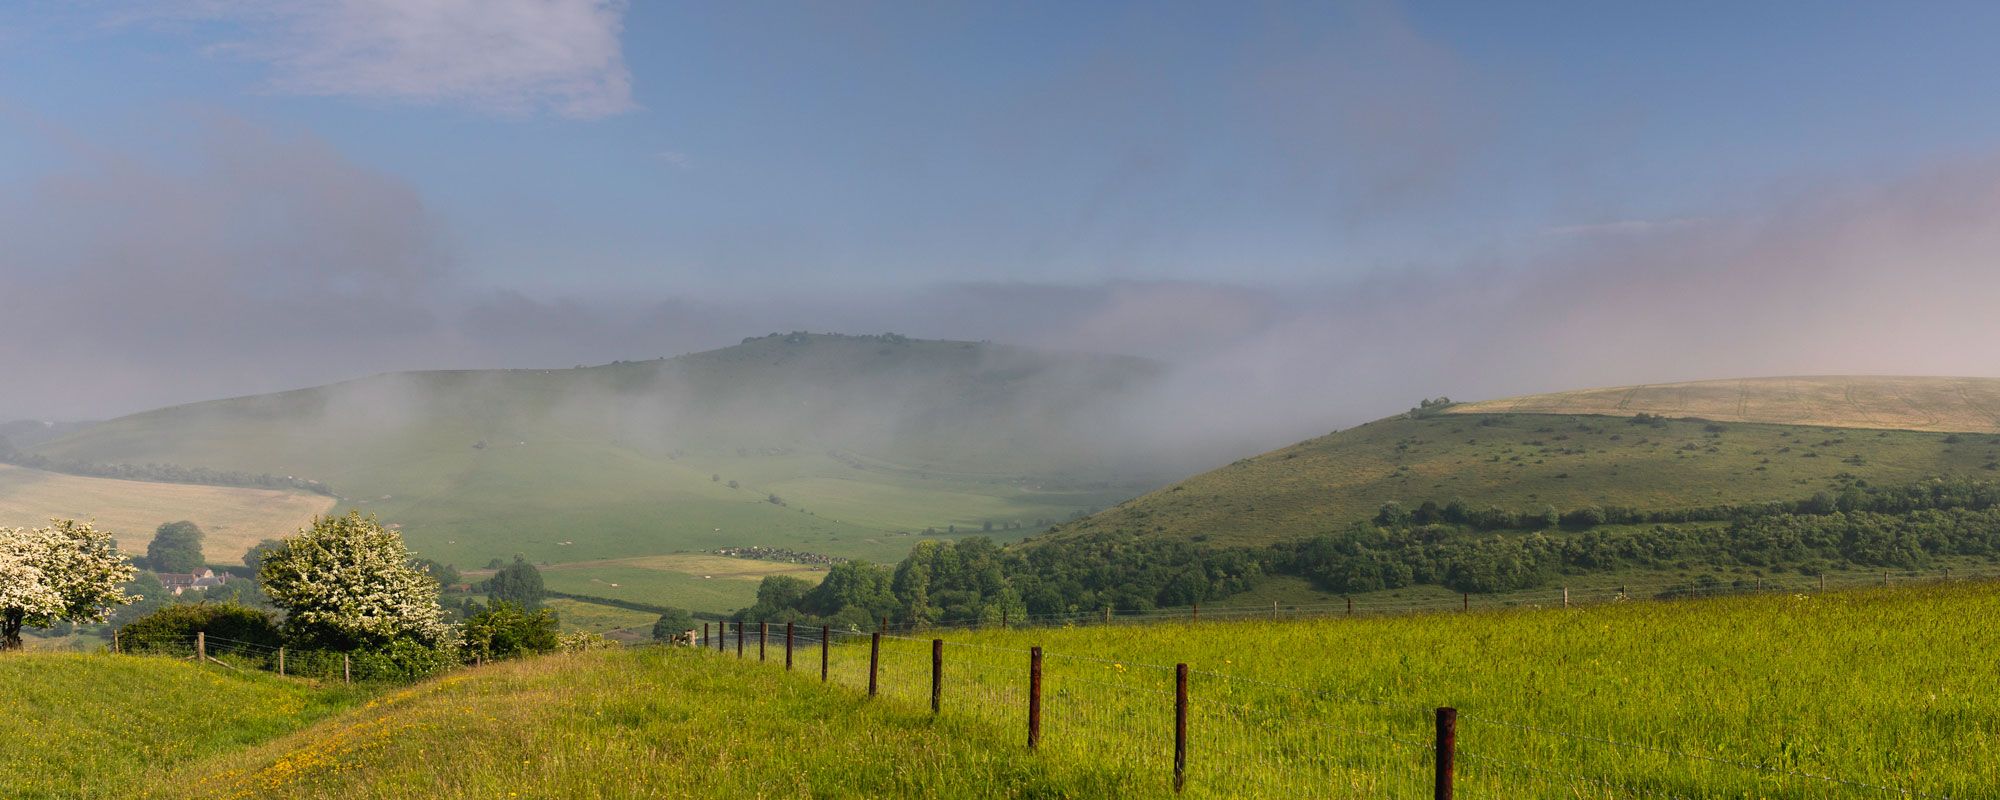 Countryside view on misty day